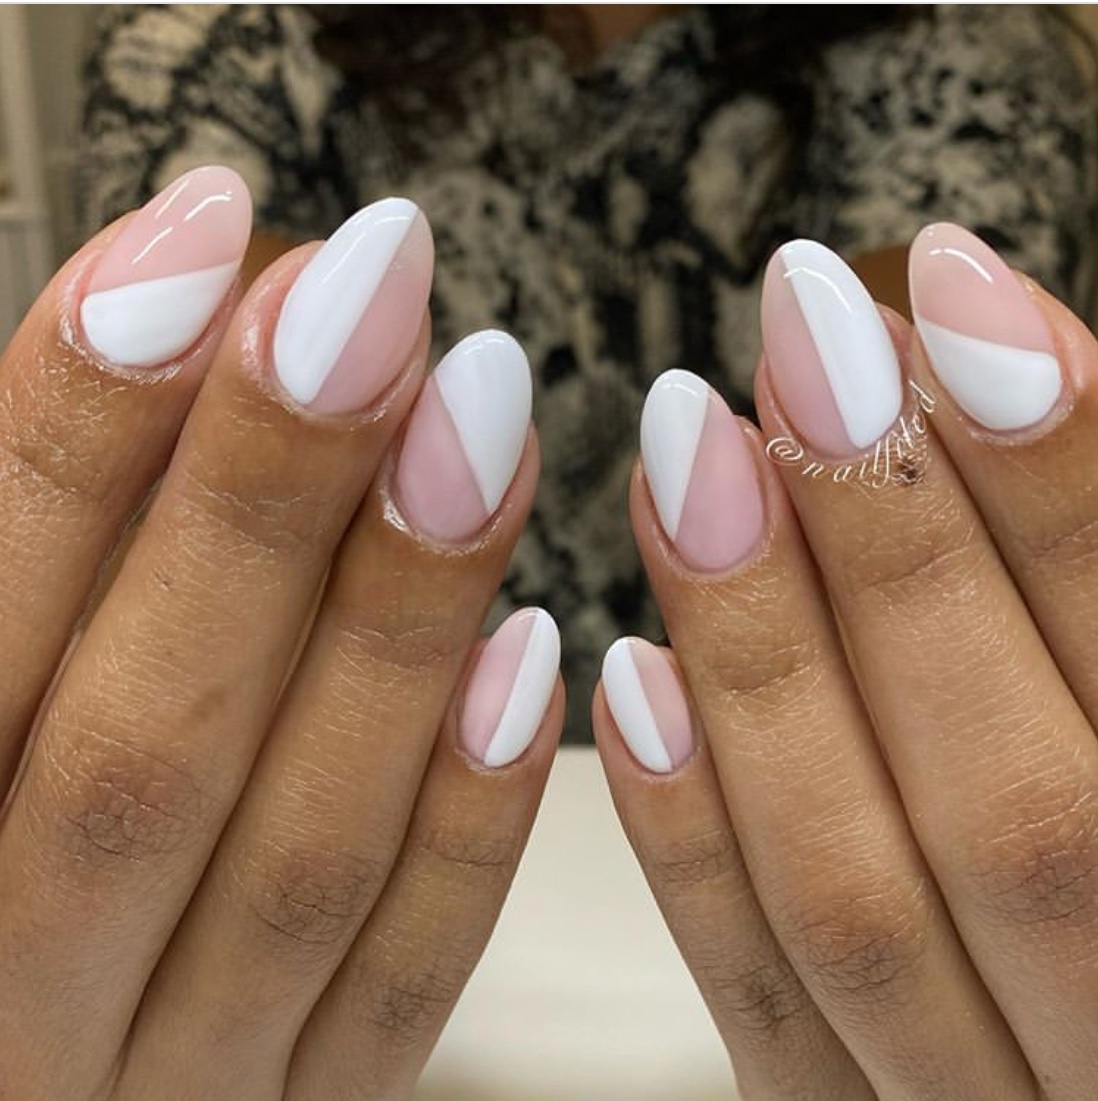 25 Cute Nail Trends To Try In 2021 - The Glossychic